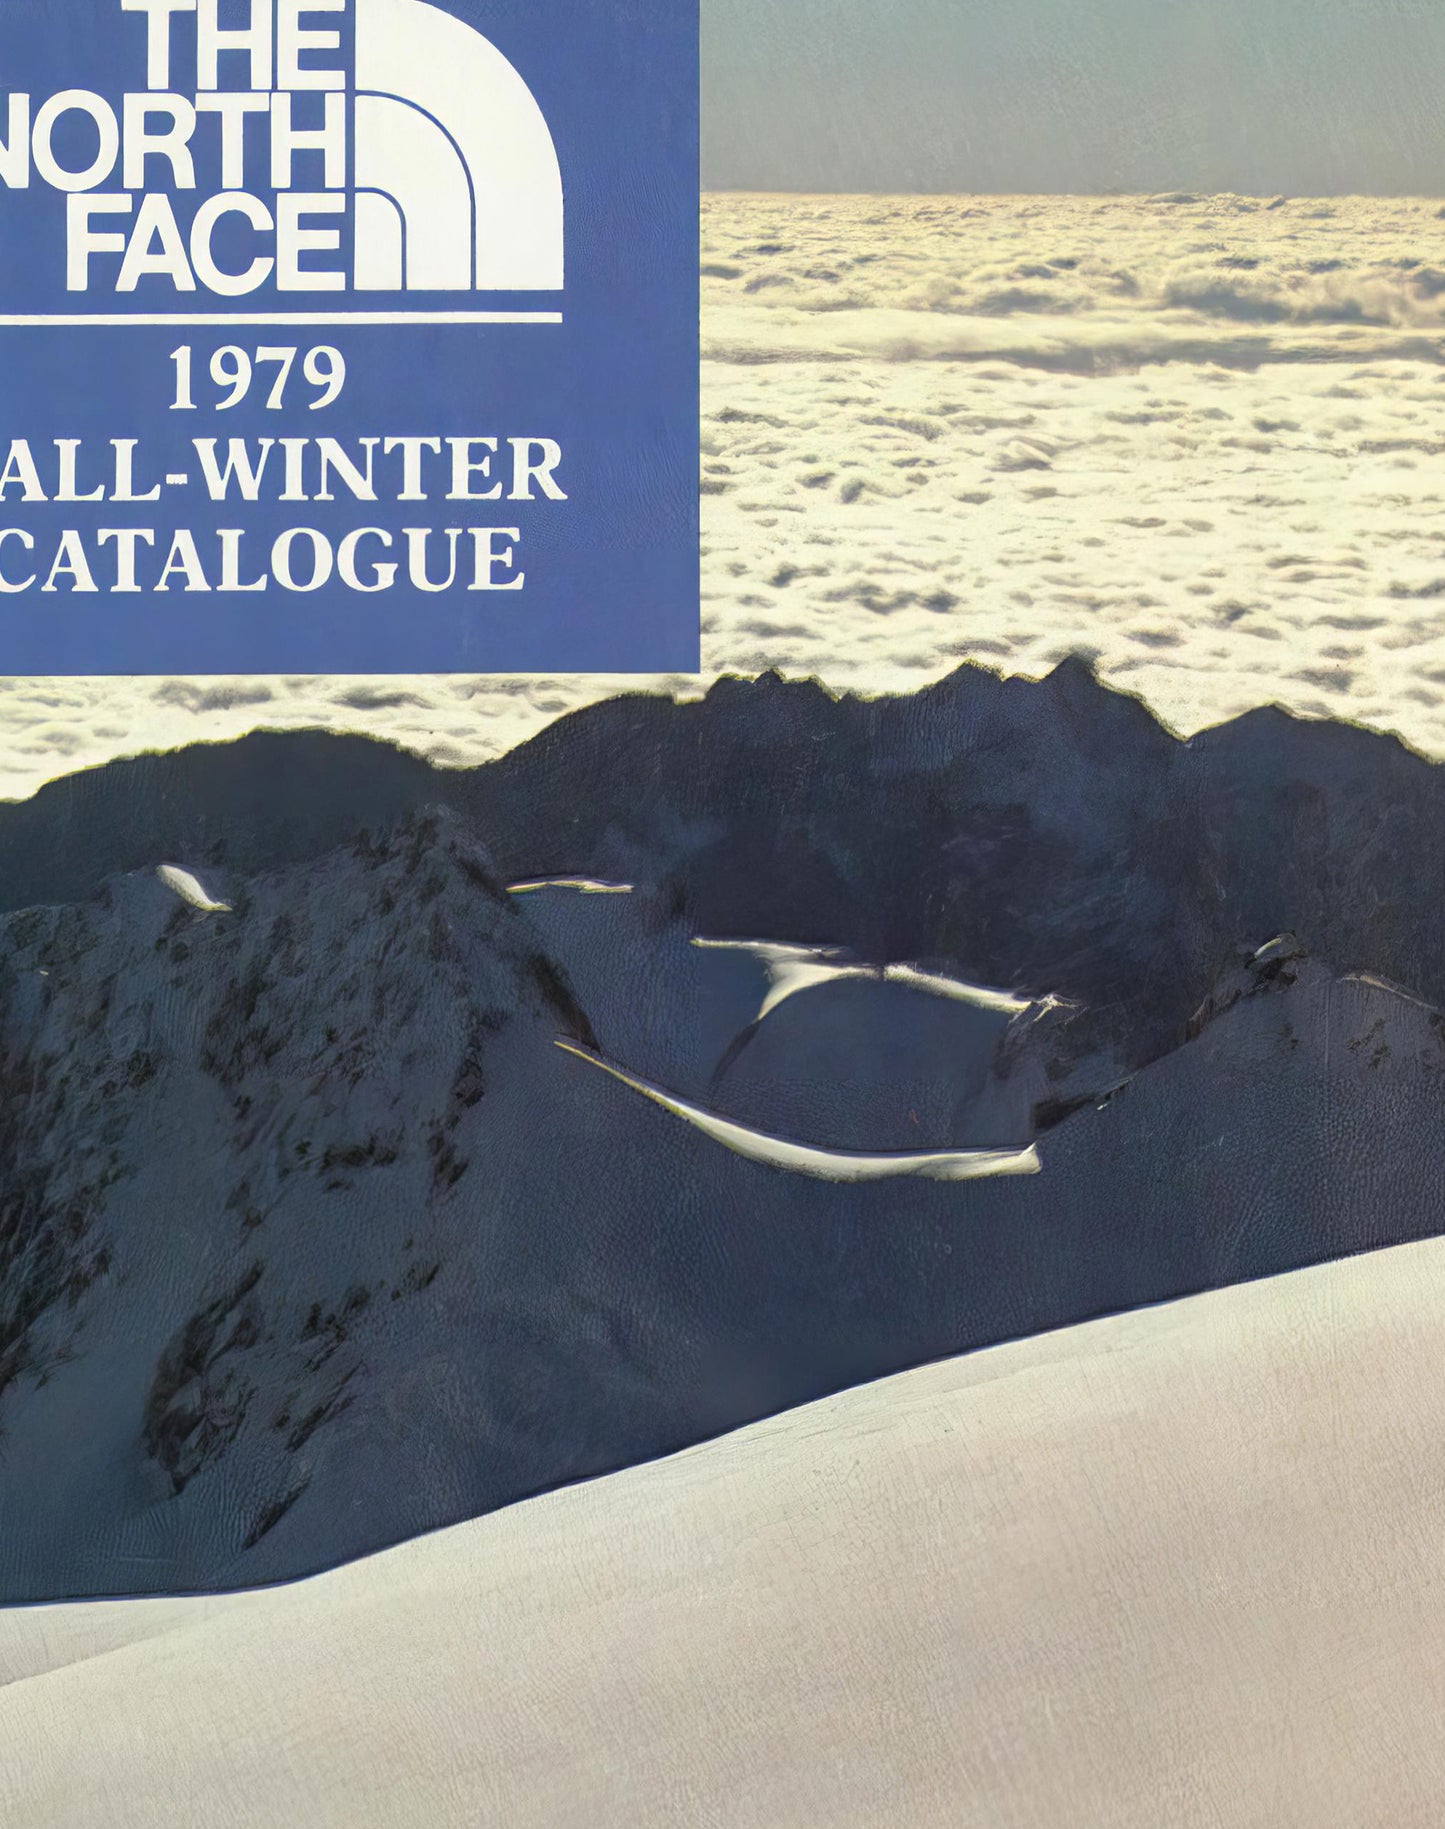 The North Face 1979 Fall/Winter Magazine Front Cover Poster